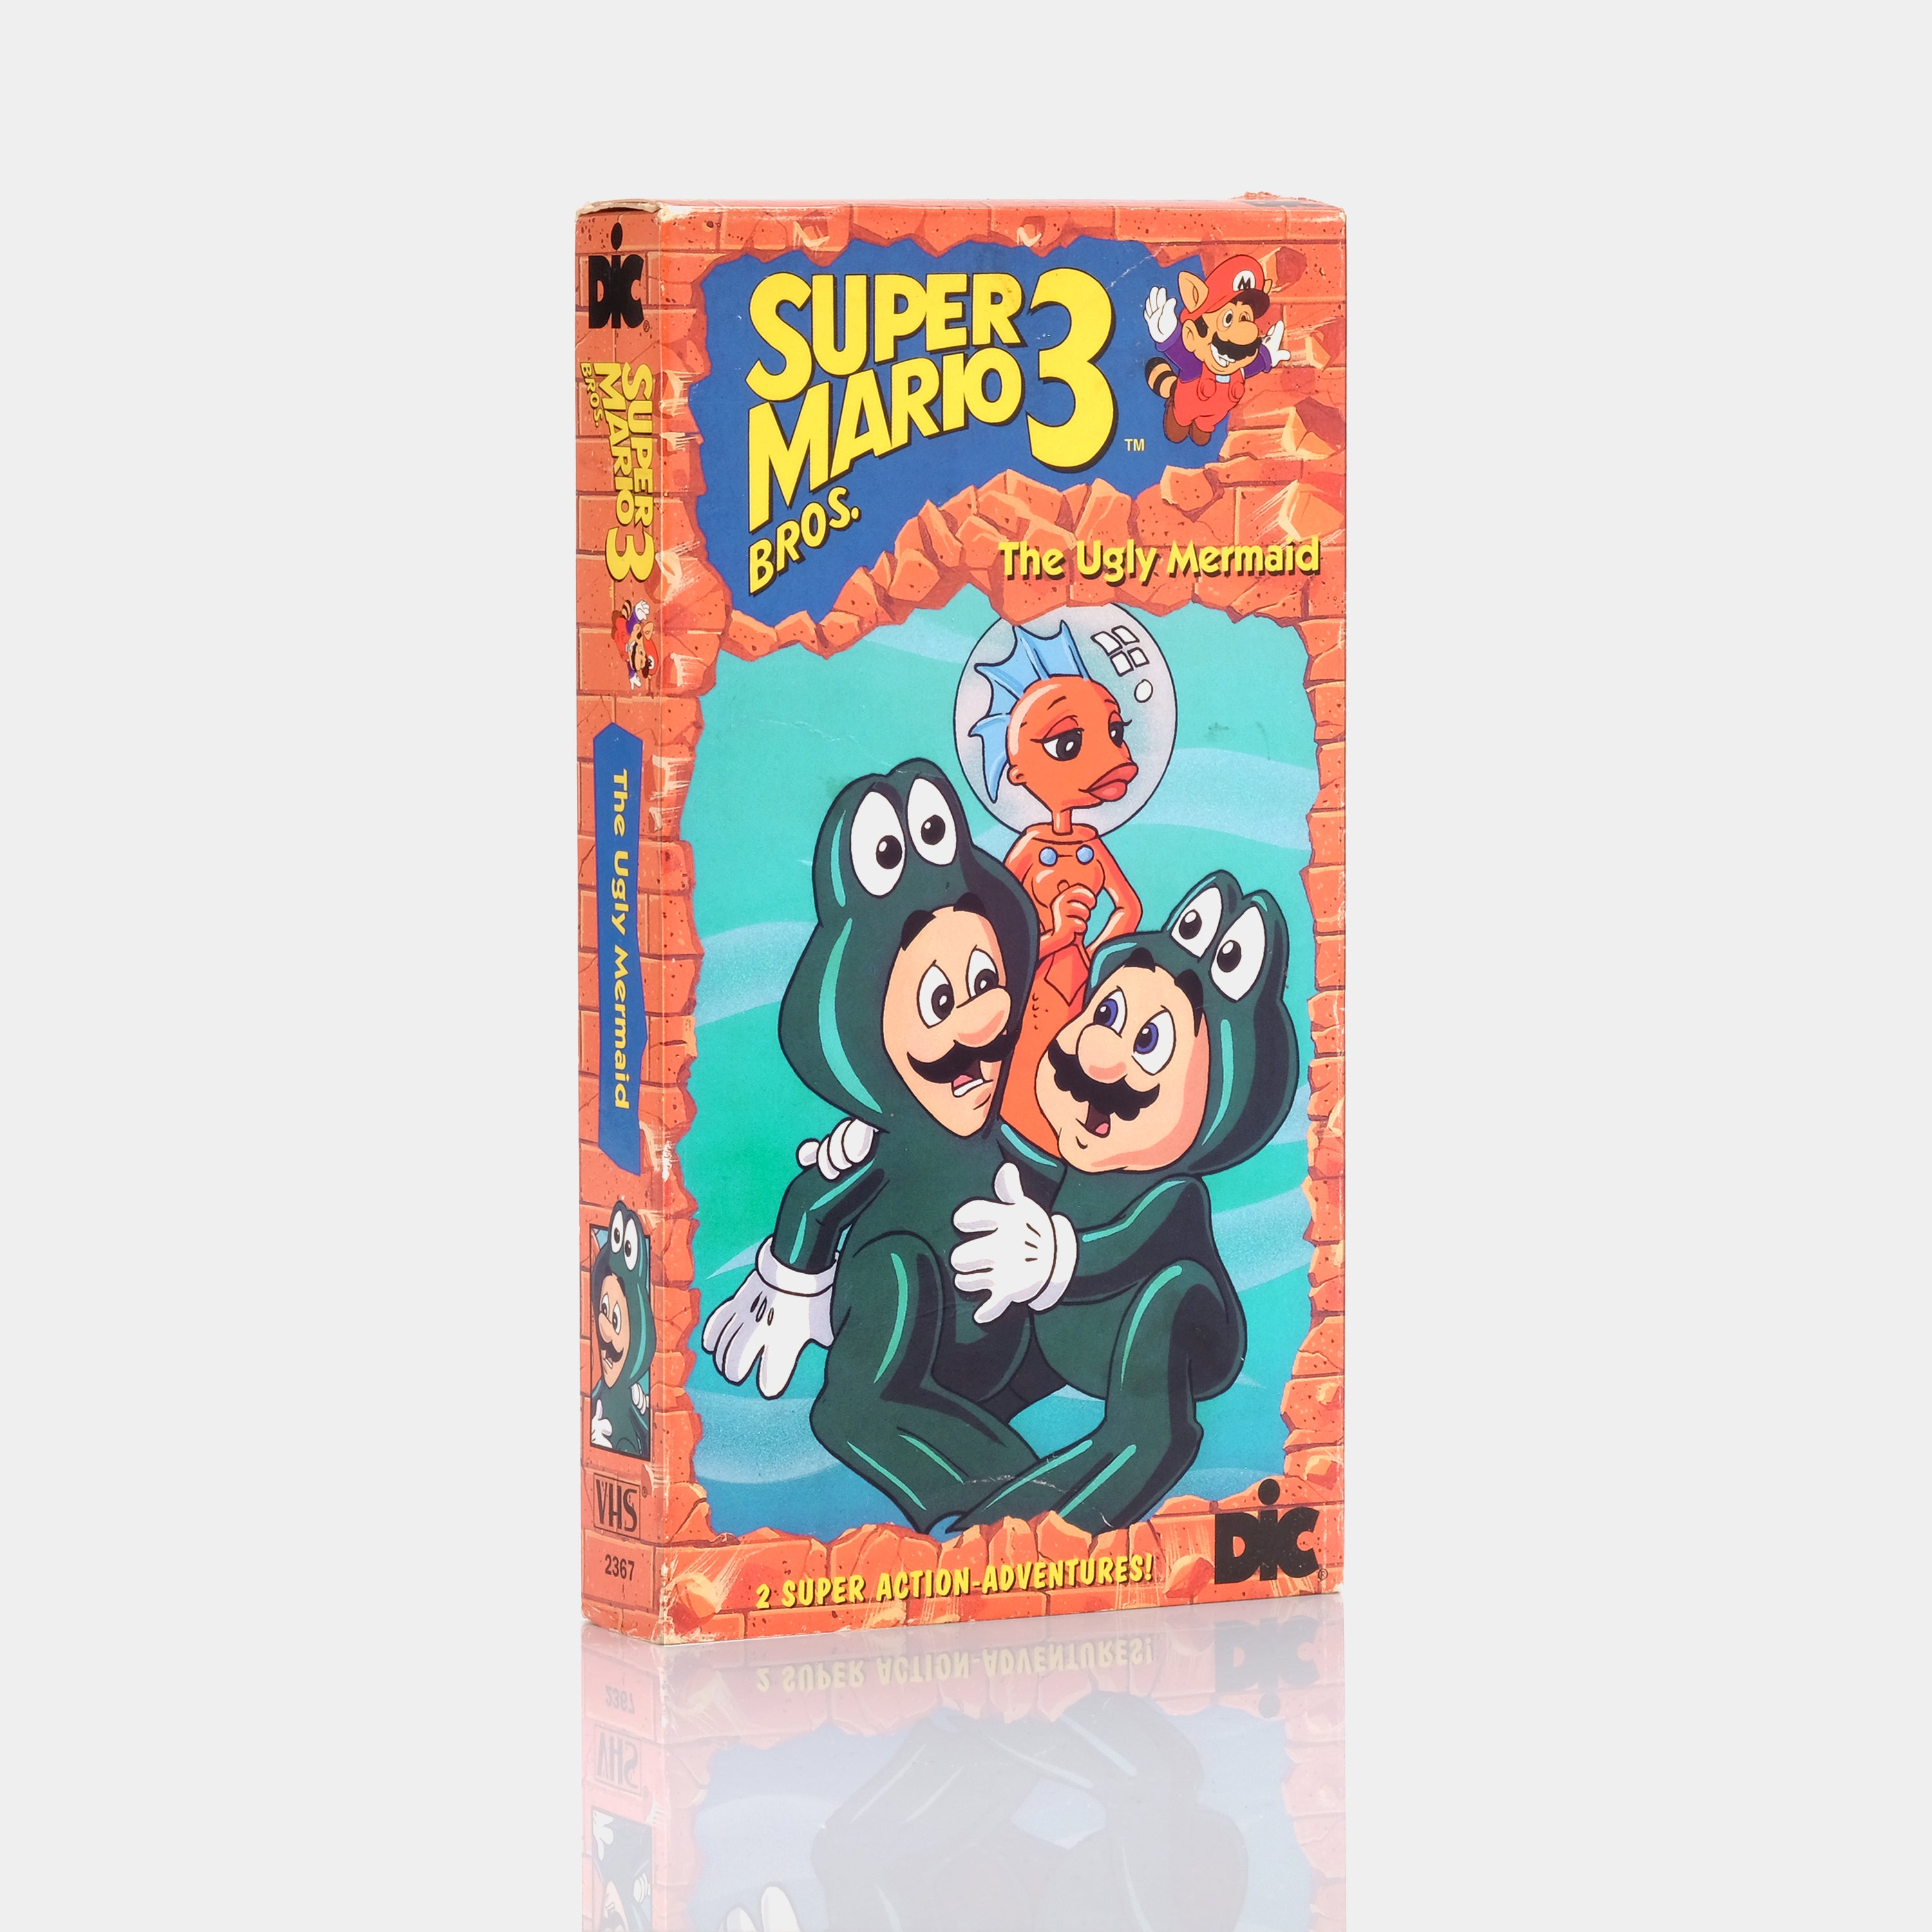 Super Mario Bros. 3: The Ugly Mermaid VHS Tape